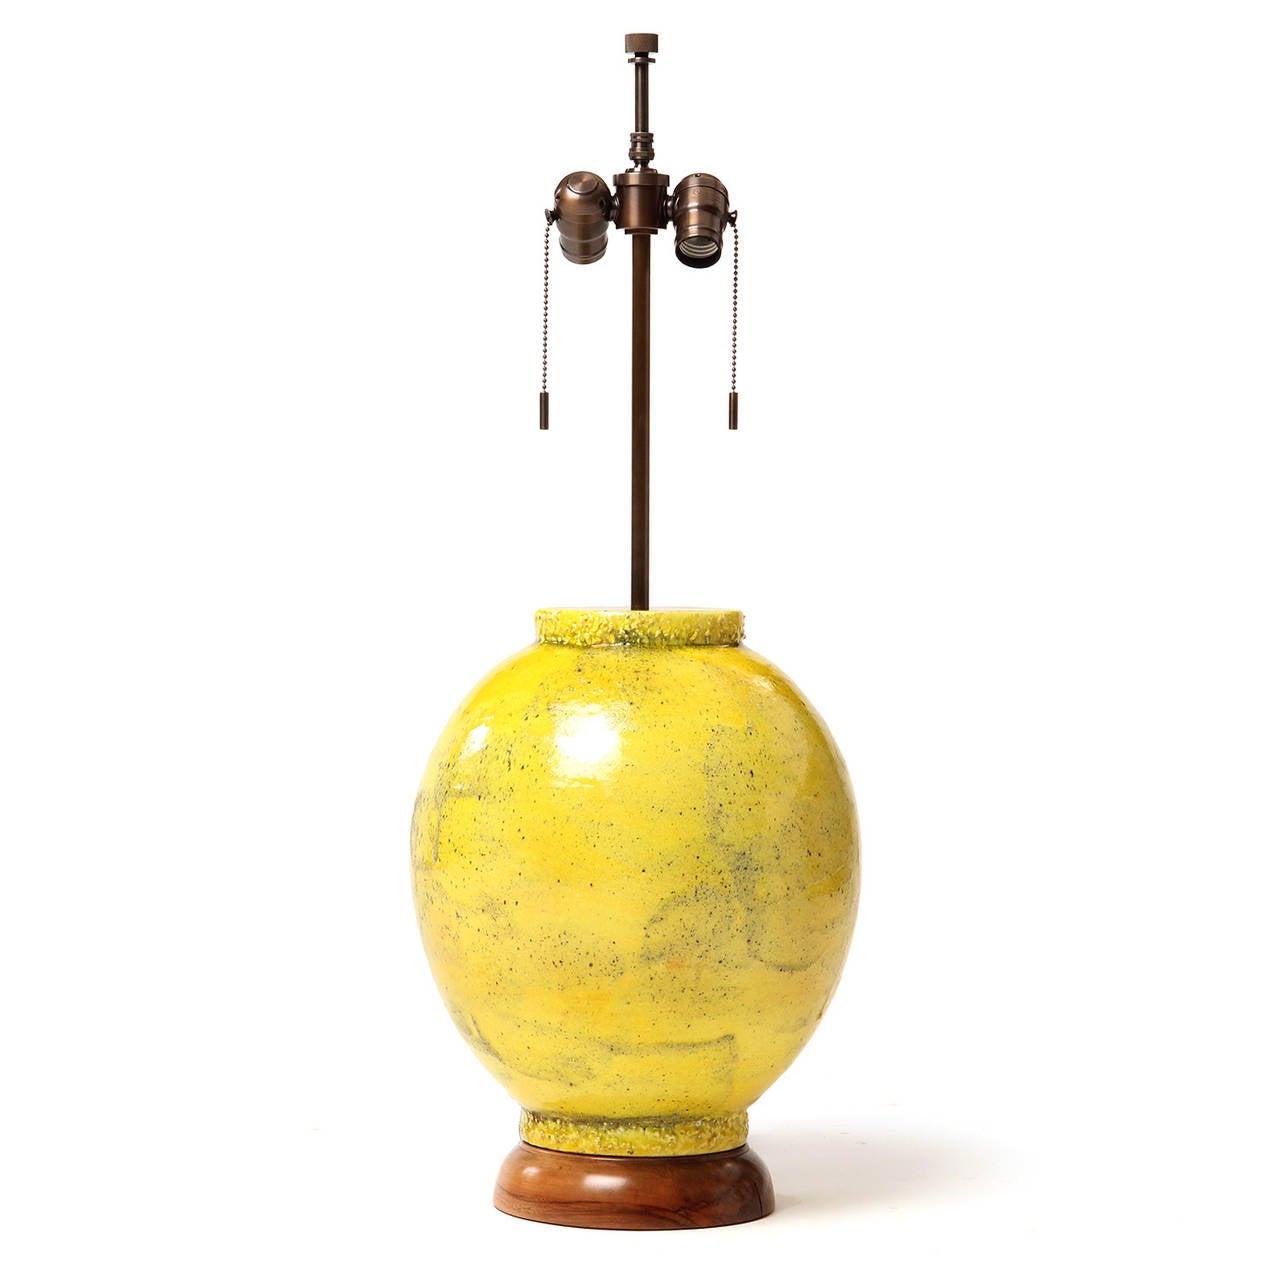 A hand-thrown and well-scaled ceramic table lamp having a baluster form with a  distinctive textured top and bottom rim; the whole lamp covered in a rich smoky yellow glaze with mocha undertones.